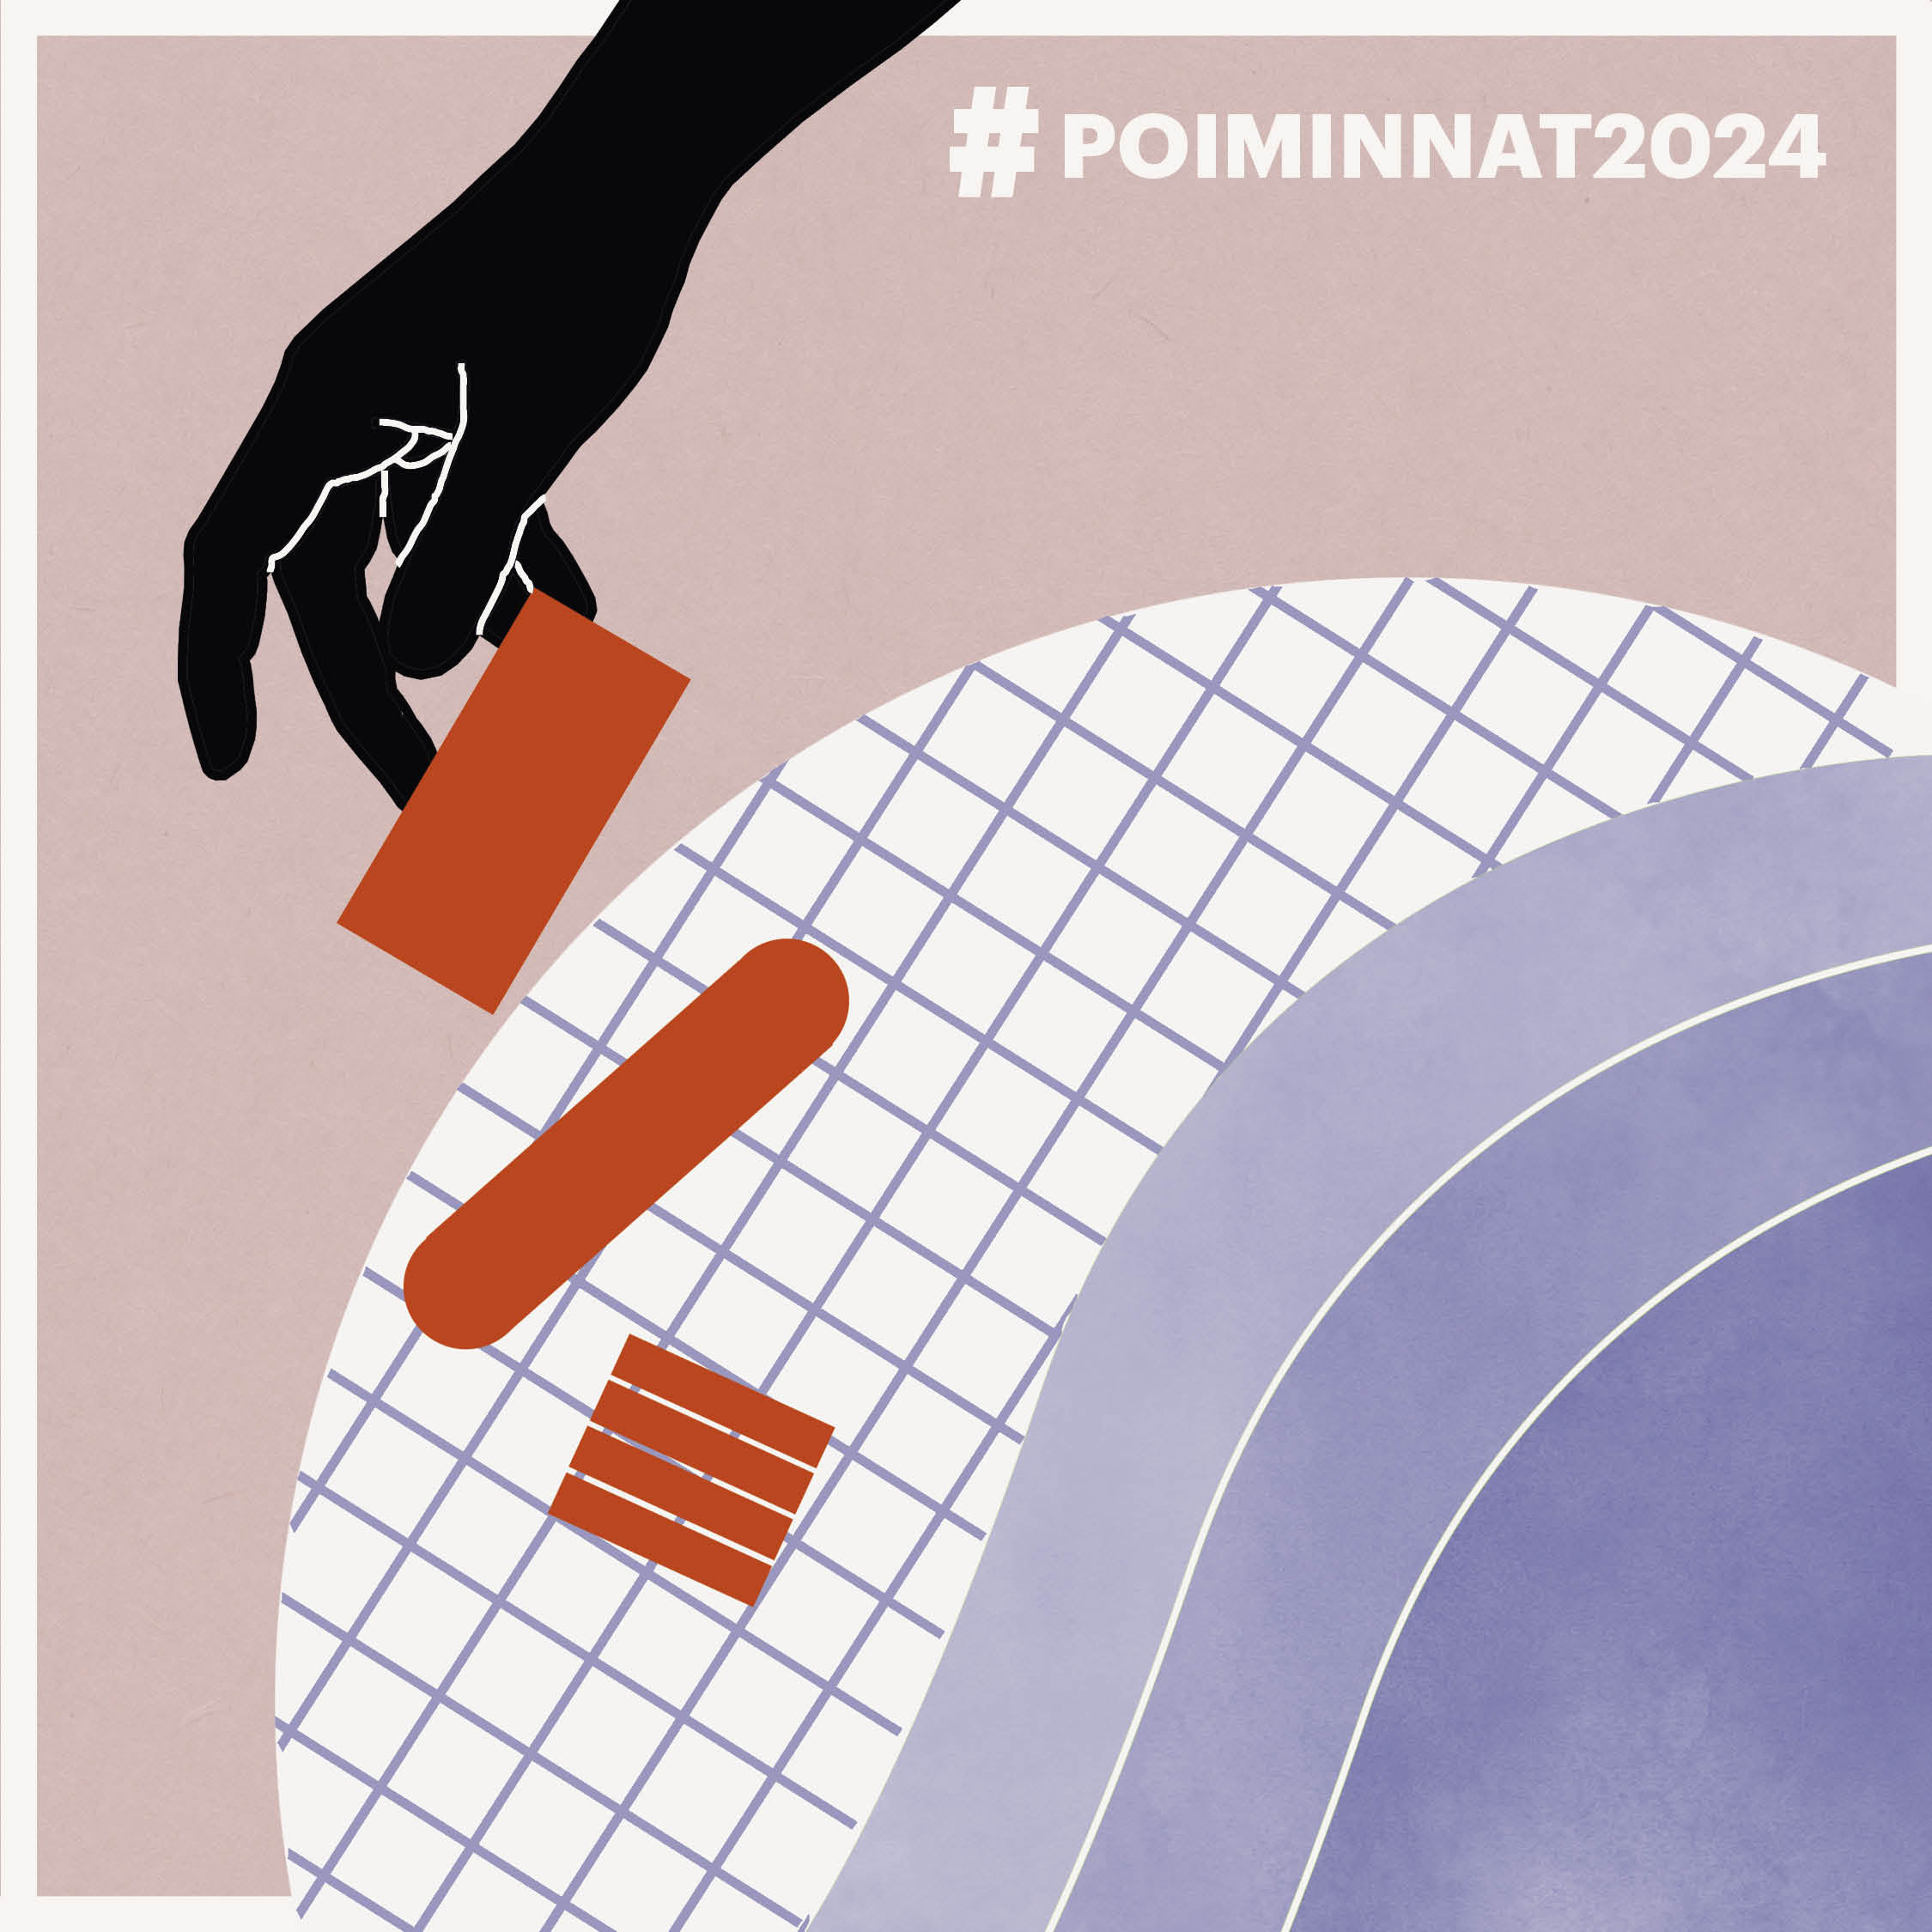 Poiminnat 2024 now out in fully digital format. Join us as we deep dive into various themes of ceramic coverings, approached from both visual inspiration and technical execution perspectives.